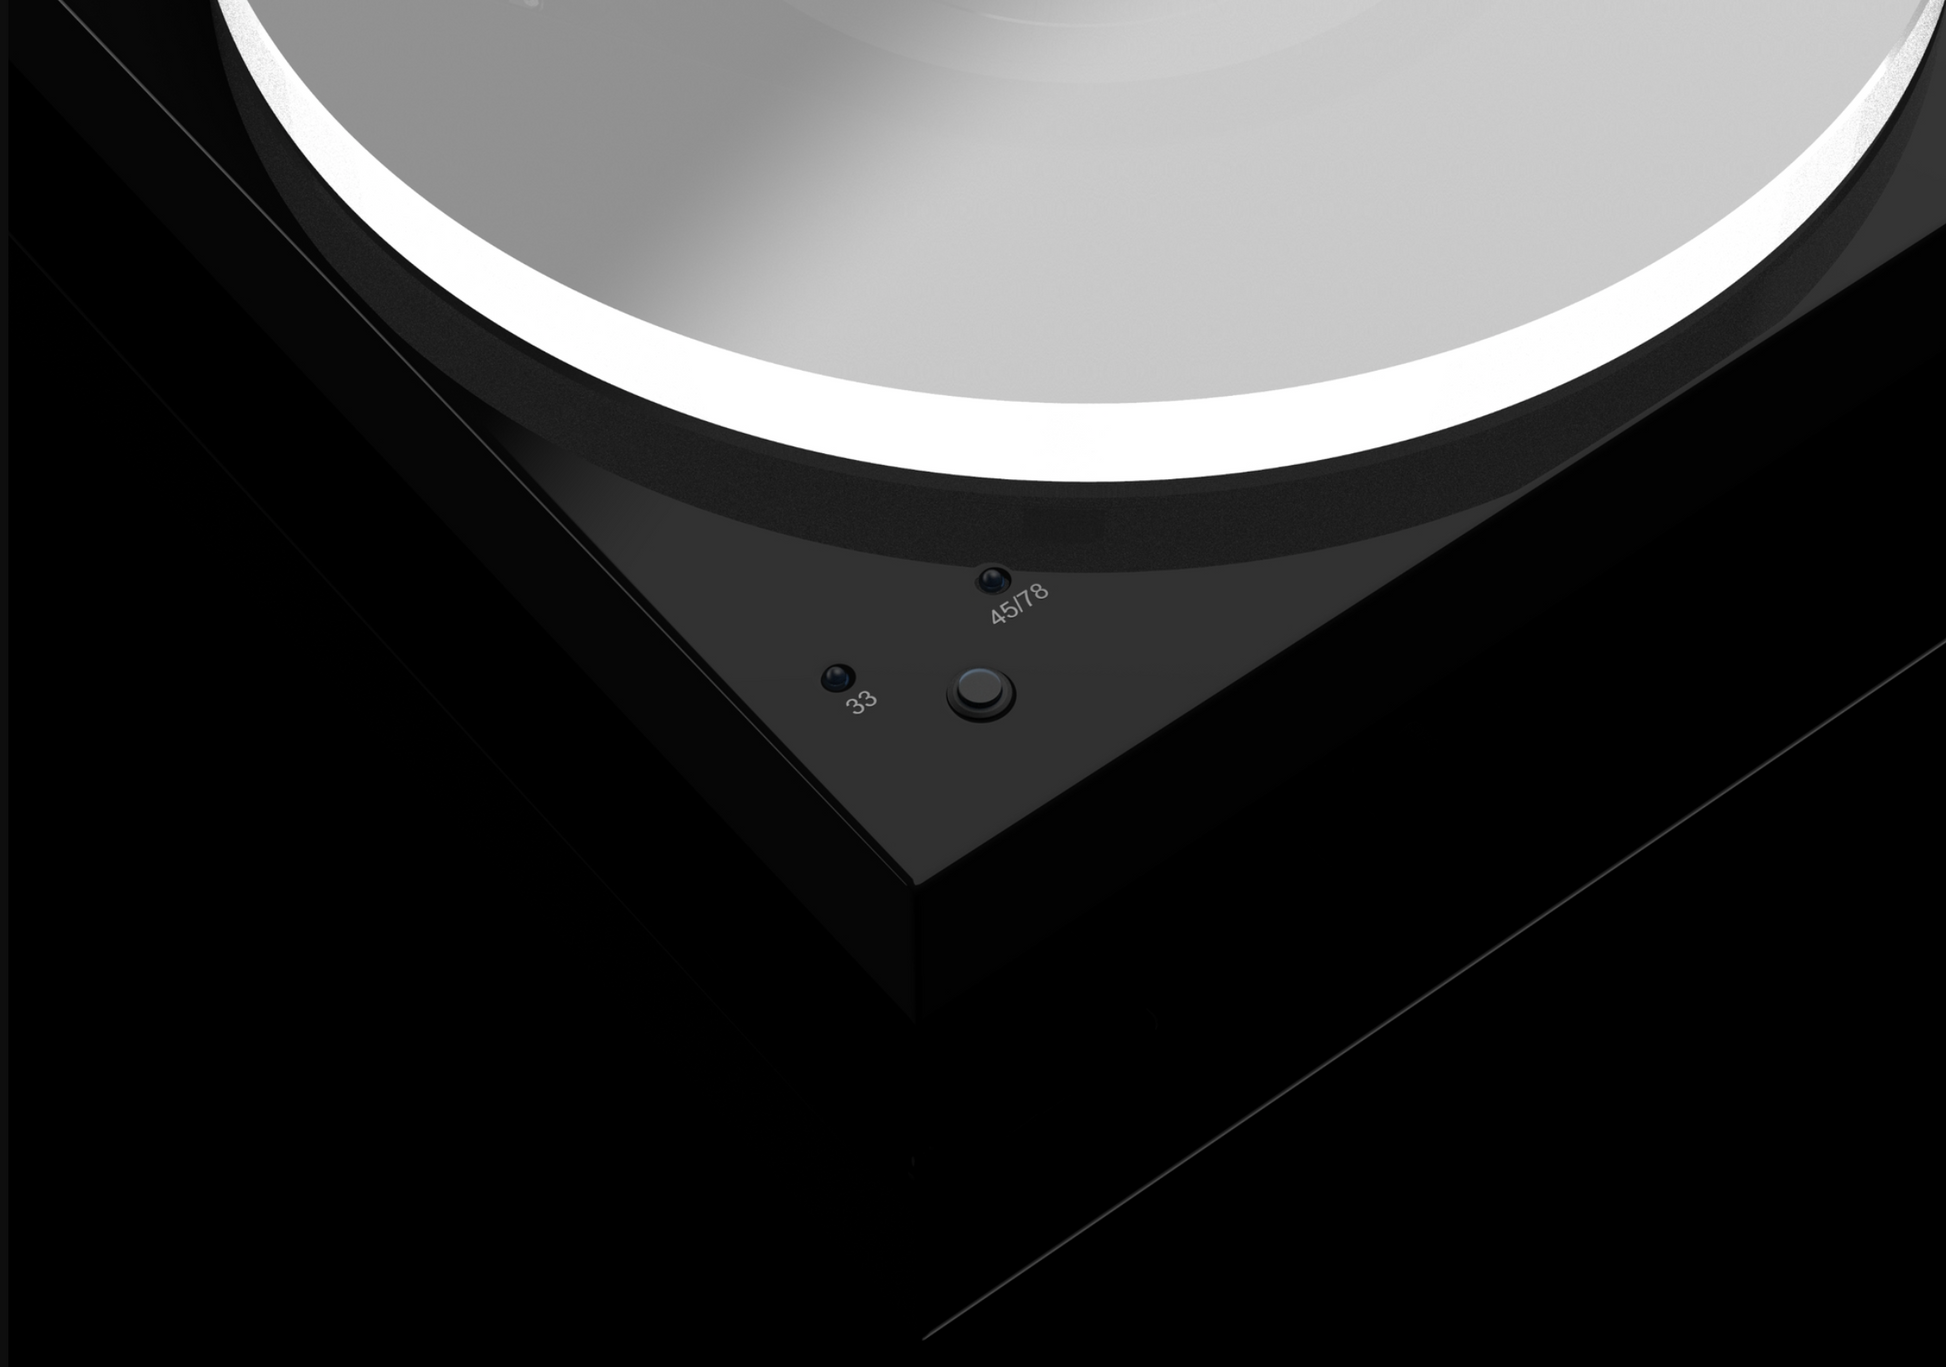 Pro-Ject X1 B Turntable with Pick It PRO Balanced Pre-Fitted image shows controls